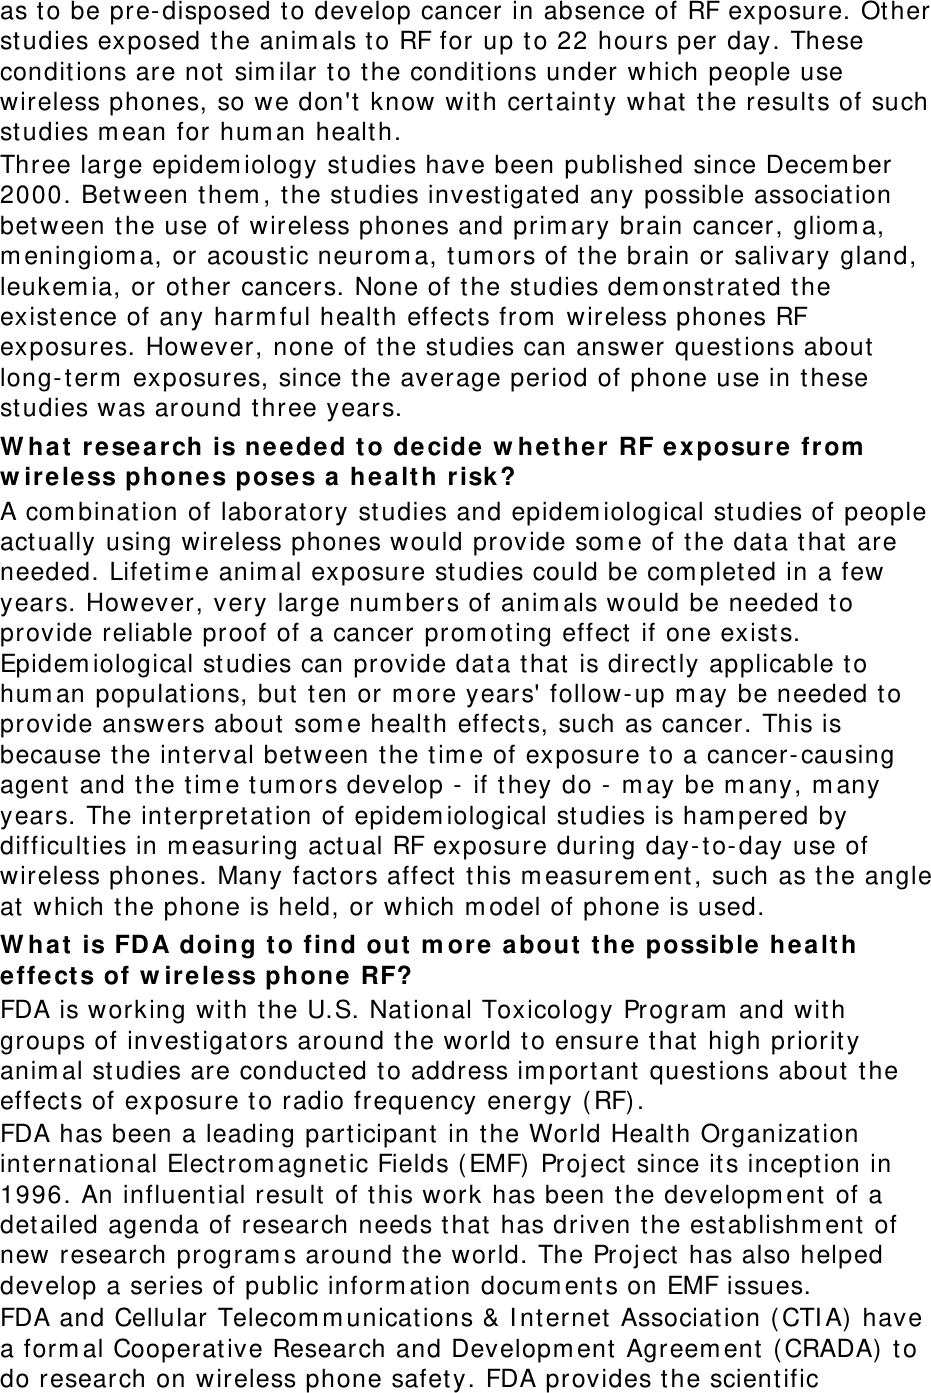 as t o be pre-disposed t o develop cancer in absence of RF exposure. Ot her studies exposed t he anim als t o RF for up t o 22 hours per day. These conditions are not  sim ilar t o the conditions under which people use wireless phones, so we don&apos;t  know with certaint y what t he results of such studies m ean for hum an health. Three large epidem iology studies have been published since Decem ber 2000. Bet ween them , t he studies invest igated any possible associat ion bet ween t he use of wireless phones and prim ary brain cancer, gliom a, m eningiom a, or acoustic neurom a, tum ors of t he brain or salivary gland, leukem ia, or ot her cancers. None of t he studies dem onst rated t he existence of any harm ful healt h effect s from  wireless phones RF exposures. However, none of t he studies can answer quest ions about long- t erm  exposures, since t he average period of phone use in t hese studies was around t hree years. W hat  re sea r ch is needed t o de cide w he t her RF ex posure fr om  w ireless phon e s pose s a healt h r isk? A com binat ion of laboratory studies and epidem iological studies of people act ually using wireless phones would provide som e of t he data t hat  are needed. Lifetim e anim al exposure st udies could be com pleted in a few years. However, very large num bers of anim als would be needed to provide reliable proof of a cancer prom oting effect  if one exist s. Epidem iological studies can provide dat a that  is direct ly applicable t o hum an populat ions, but  t en or m ore years&apos; follow- up m ay be needed t o provide answers about  som e healt h effect s, such as cancer. This is because t he int erval bet ween t he tim e of exposure to a cancer- causing agent  and t he tim e tum ors develop -  if they do -  m ay be m any, m any years. The interpret at ion of epidem iological st udies is ham pered by difficulties in m easuring act ual RF exposure during day- t o-day use of wireless phones. Many fact ors affect  t his m easurem ent, such as t he angle at  which t he phone is held, or which m odel of phone is used. W hat  is FD A doing t o find out  m or e  about  t he possible  hea lt h effect s of w ireless phone  RF? FDA is working wit h t he U.S. National Toxicology Program  and with groups of invest igators around t he world t o ensure t hat high priority anim al st udies are conduct ed t o address im port ant  questions about  t he effect s of exposure to radio frequency energy ( RF) . FDA has been a leading part icipant  in t he World Health Organization international Elect rom agnetic Fields ( EMF)  Project  since its incept ion in 1996. An influent ial result of t his work has been the developm ent  of a det ailed agenda of research needs t hat  has driven t he est ablishm ent  of new research program s around t he world. The Proj ect  has also helped develop a series of public inform ation docum ent s on EMF issues. FDA and Cellular Telecom m unicat ions &amp; I nt ernet  Association ( CTI A)  have a form al Cooperative Research and Developm ent  Agreem ent (CRADA)  t o do research on wireless phone safety. FDA provides the scient ific 